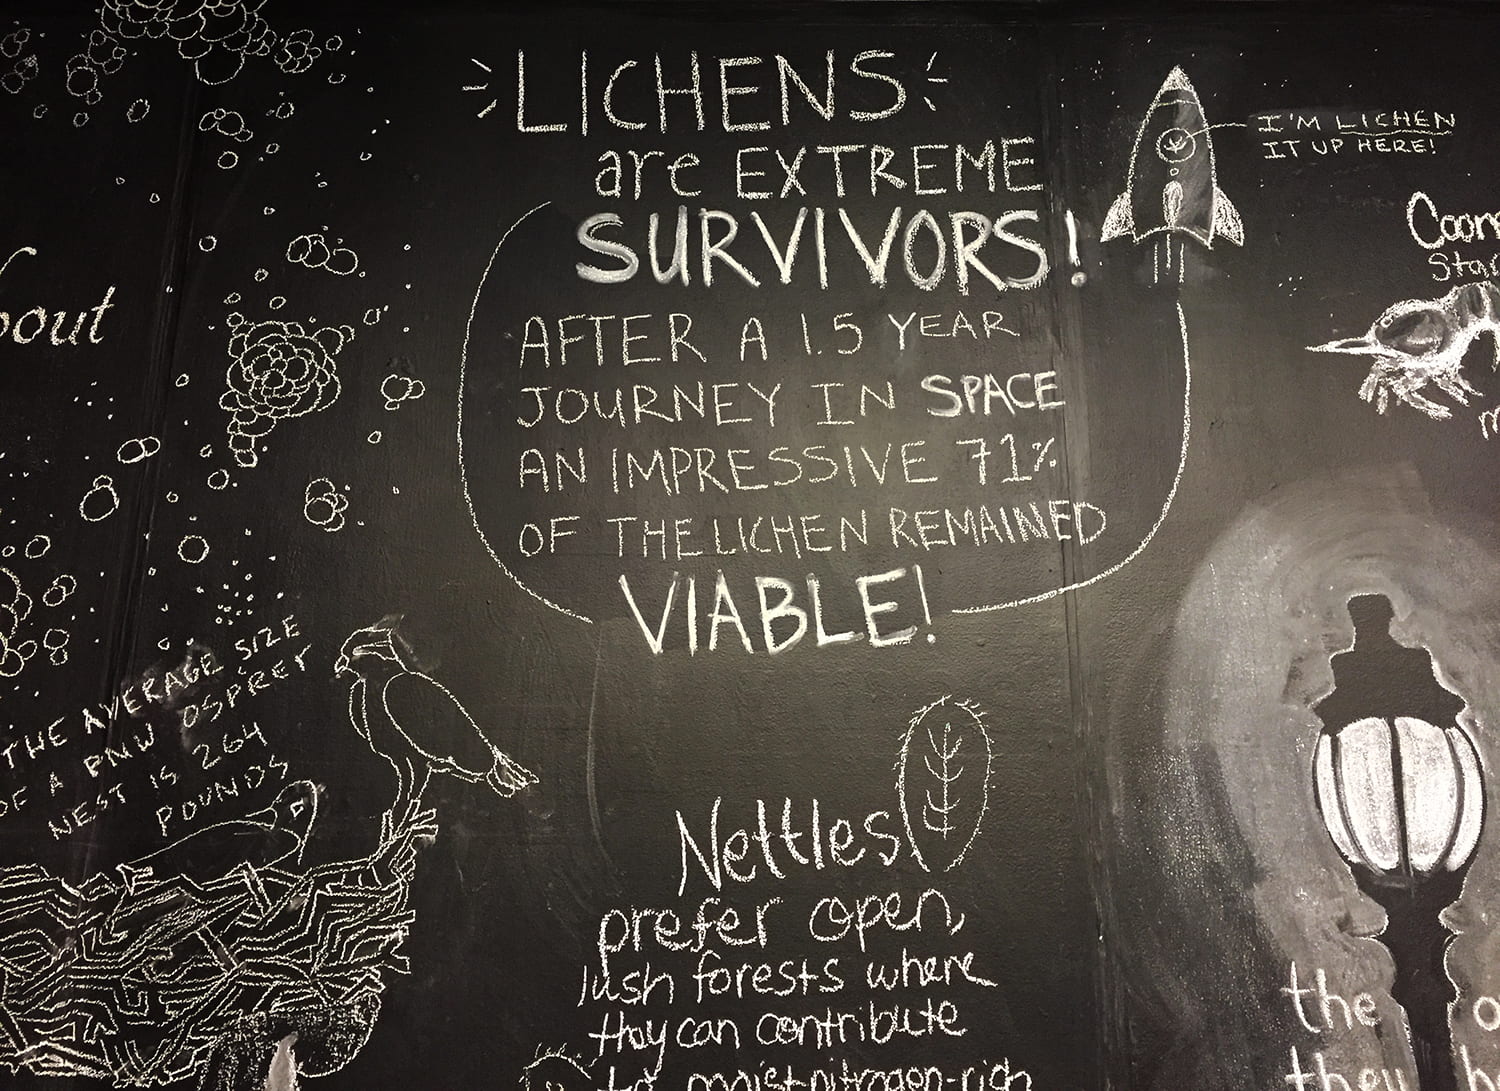 words "Lichens are extreme survivors! After a 1.5 year journey in space an impressive 71% of the lichen remained viable!" circled by a drawing of a rocket with the words "I'm lichen it up here" coming out of it.